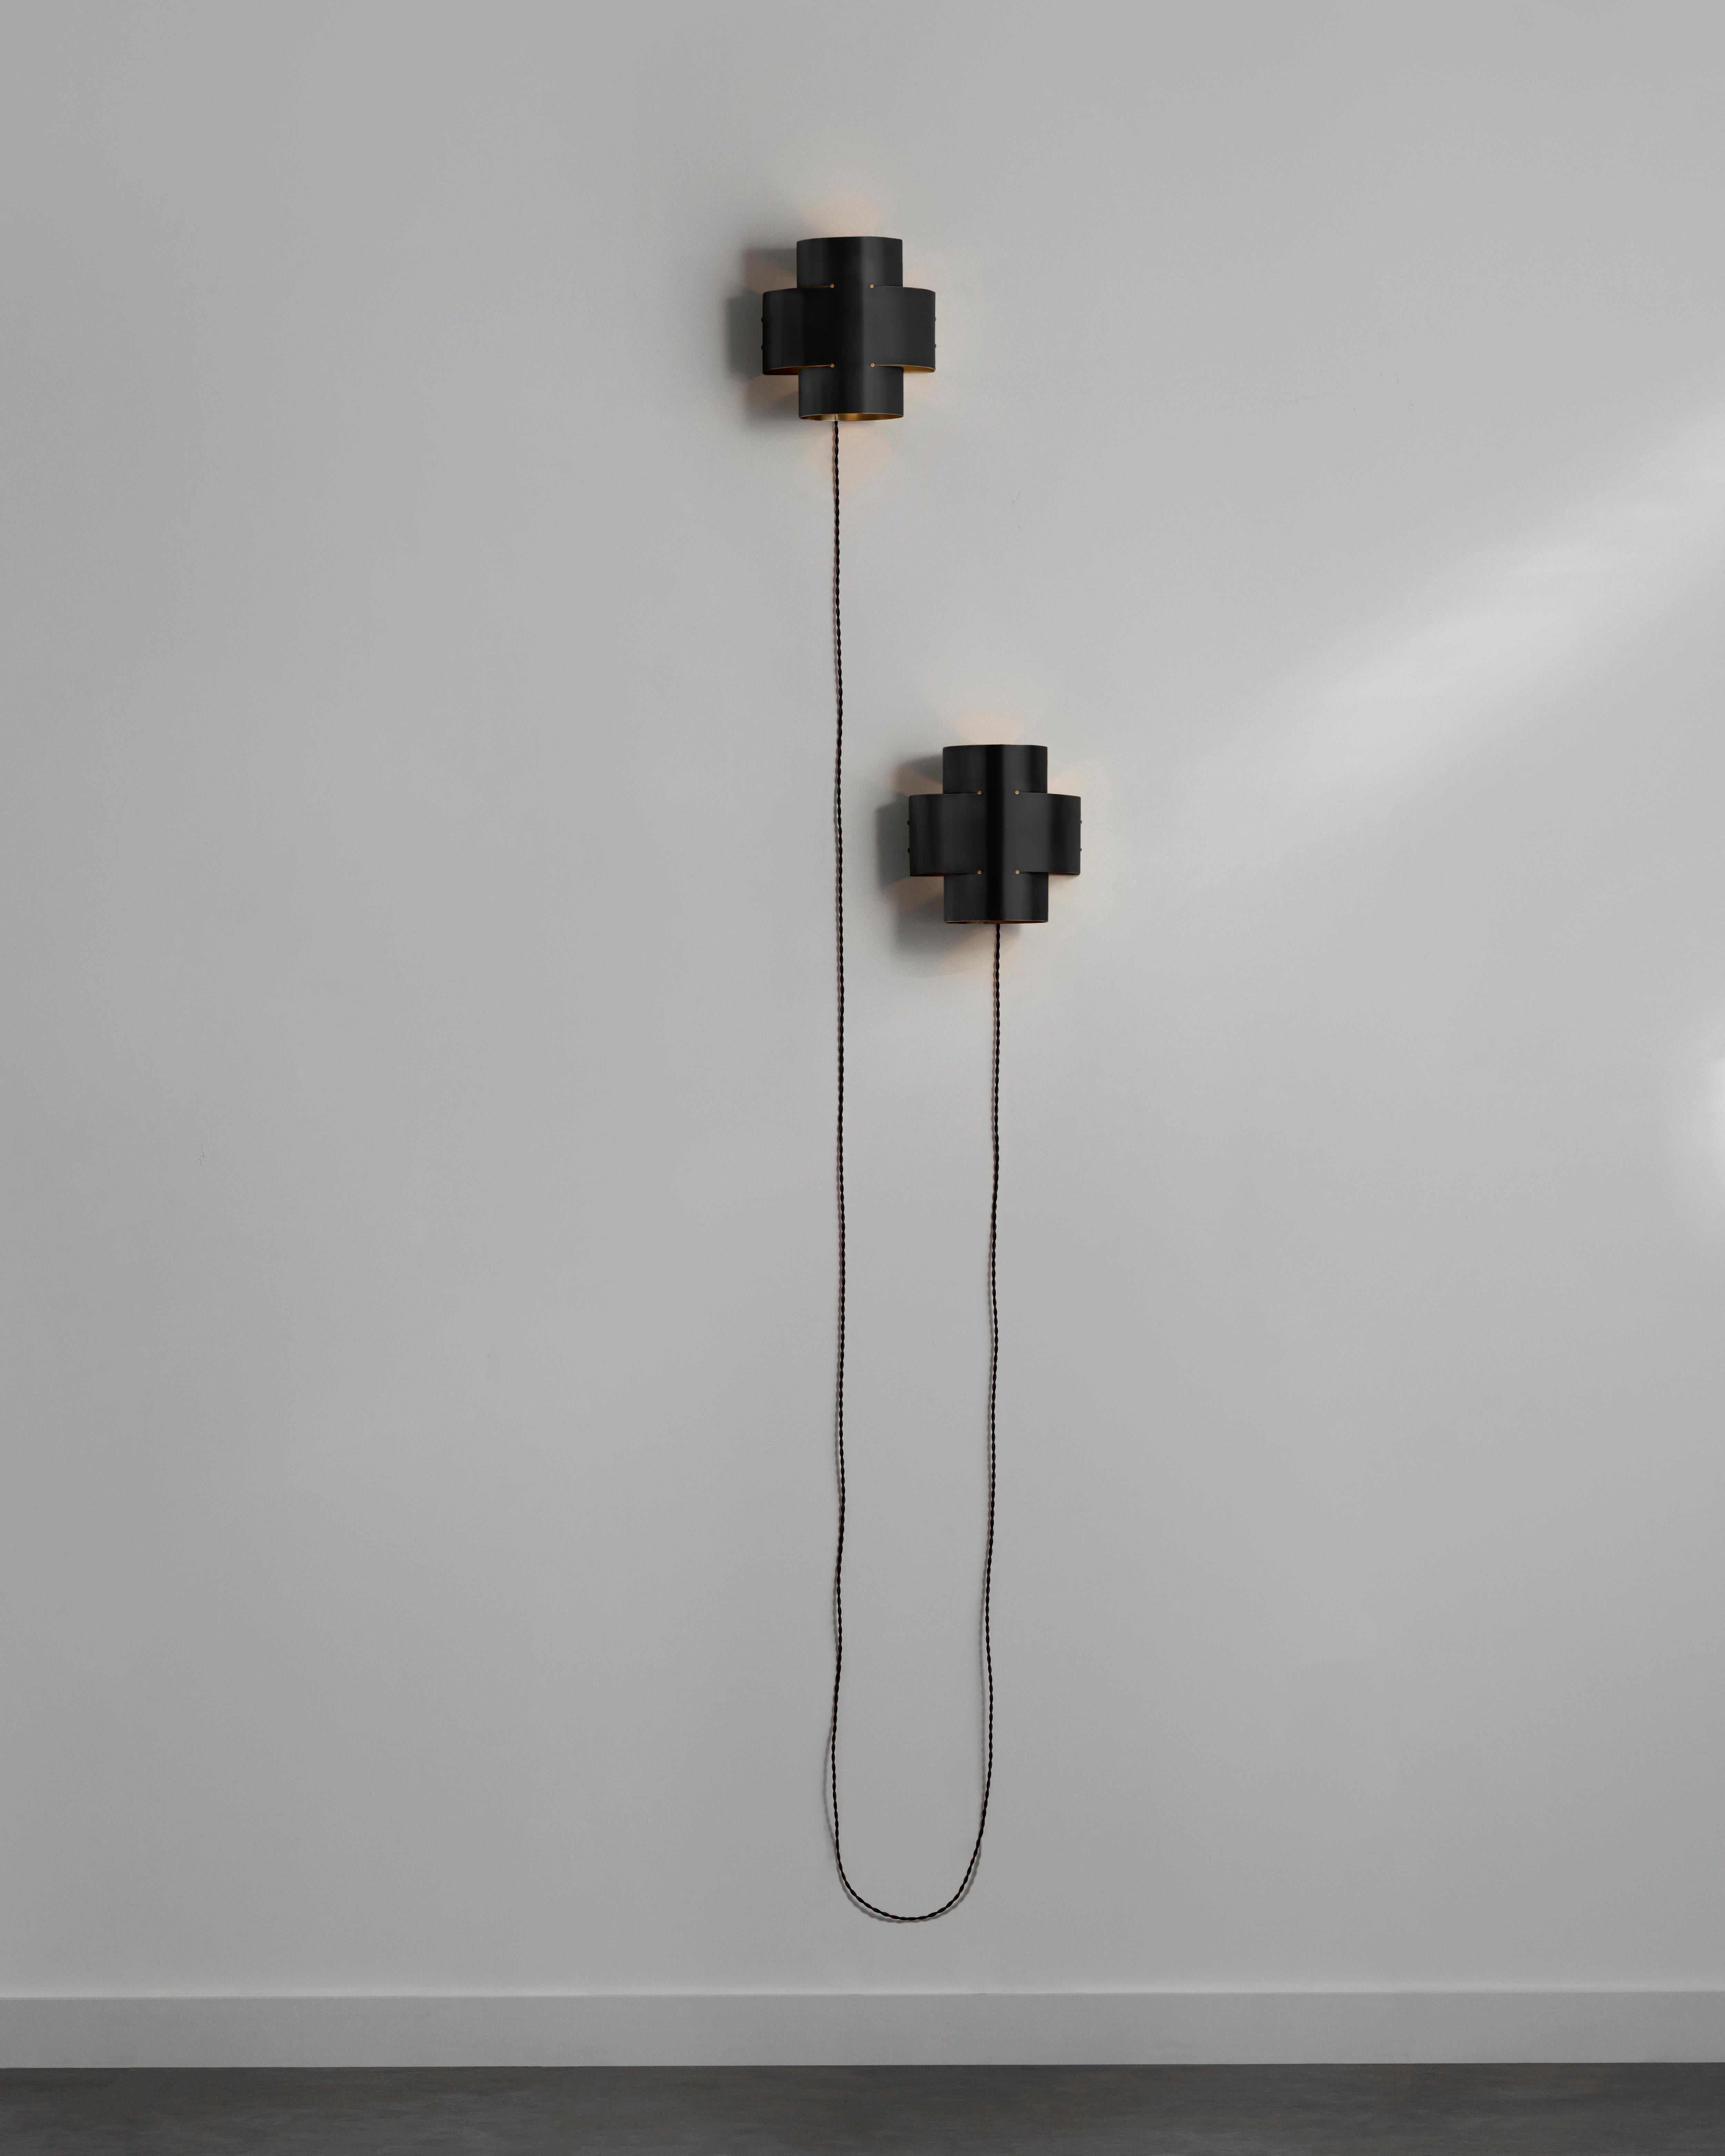 Plus Pair Lamp by Paul Matter
Dimensions: L: 240 mm, H: 254 mm, D: 155 mm
1 Type E27 Base, 3W - 5W LED
Warm white, Voltage 220-240V
CE certified
Dimmable upon request
Materials: Brass

Finished in burnt, aged, buffed brass and buffed